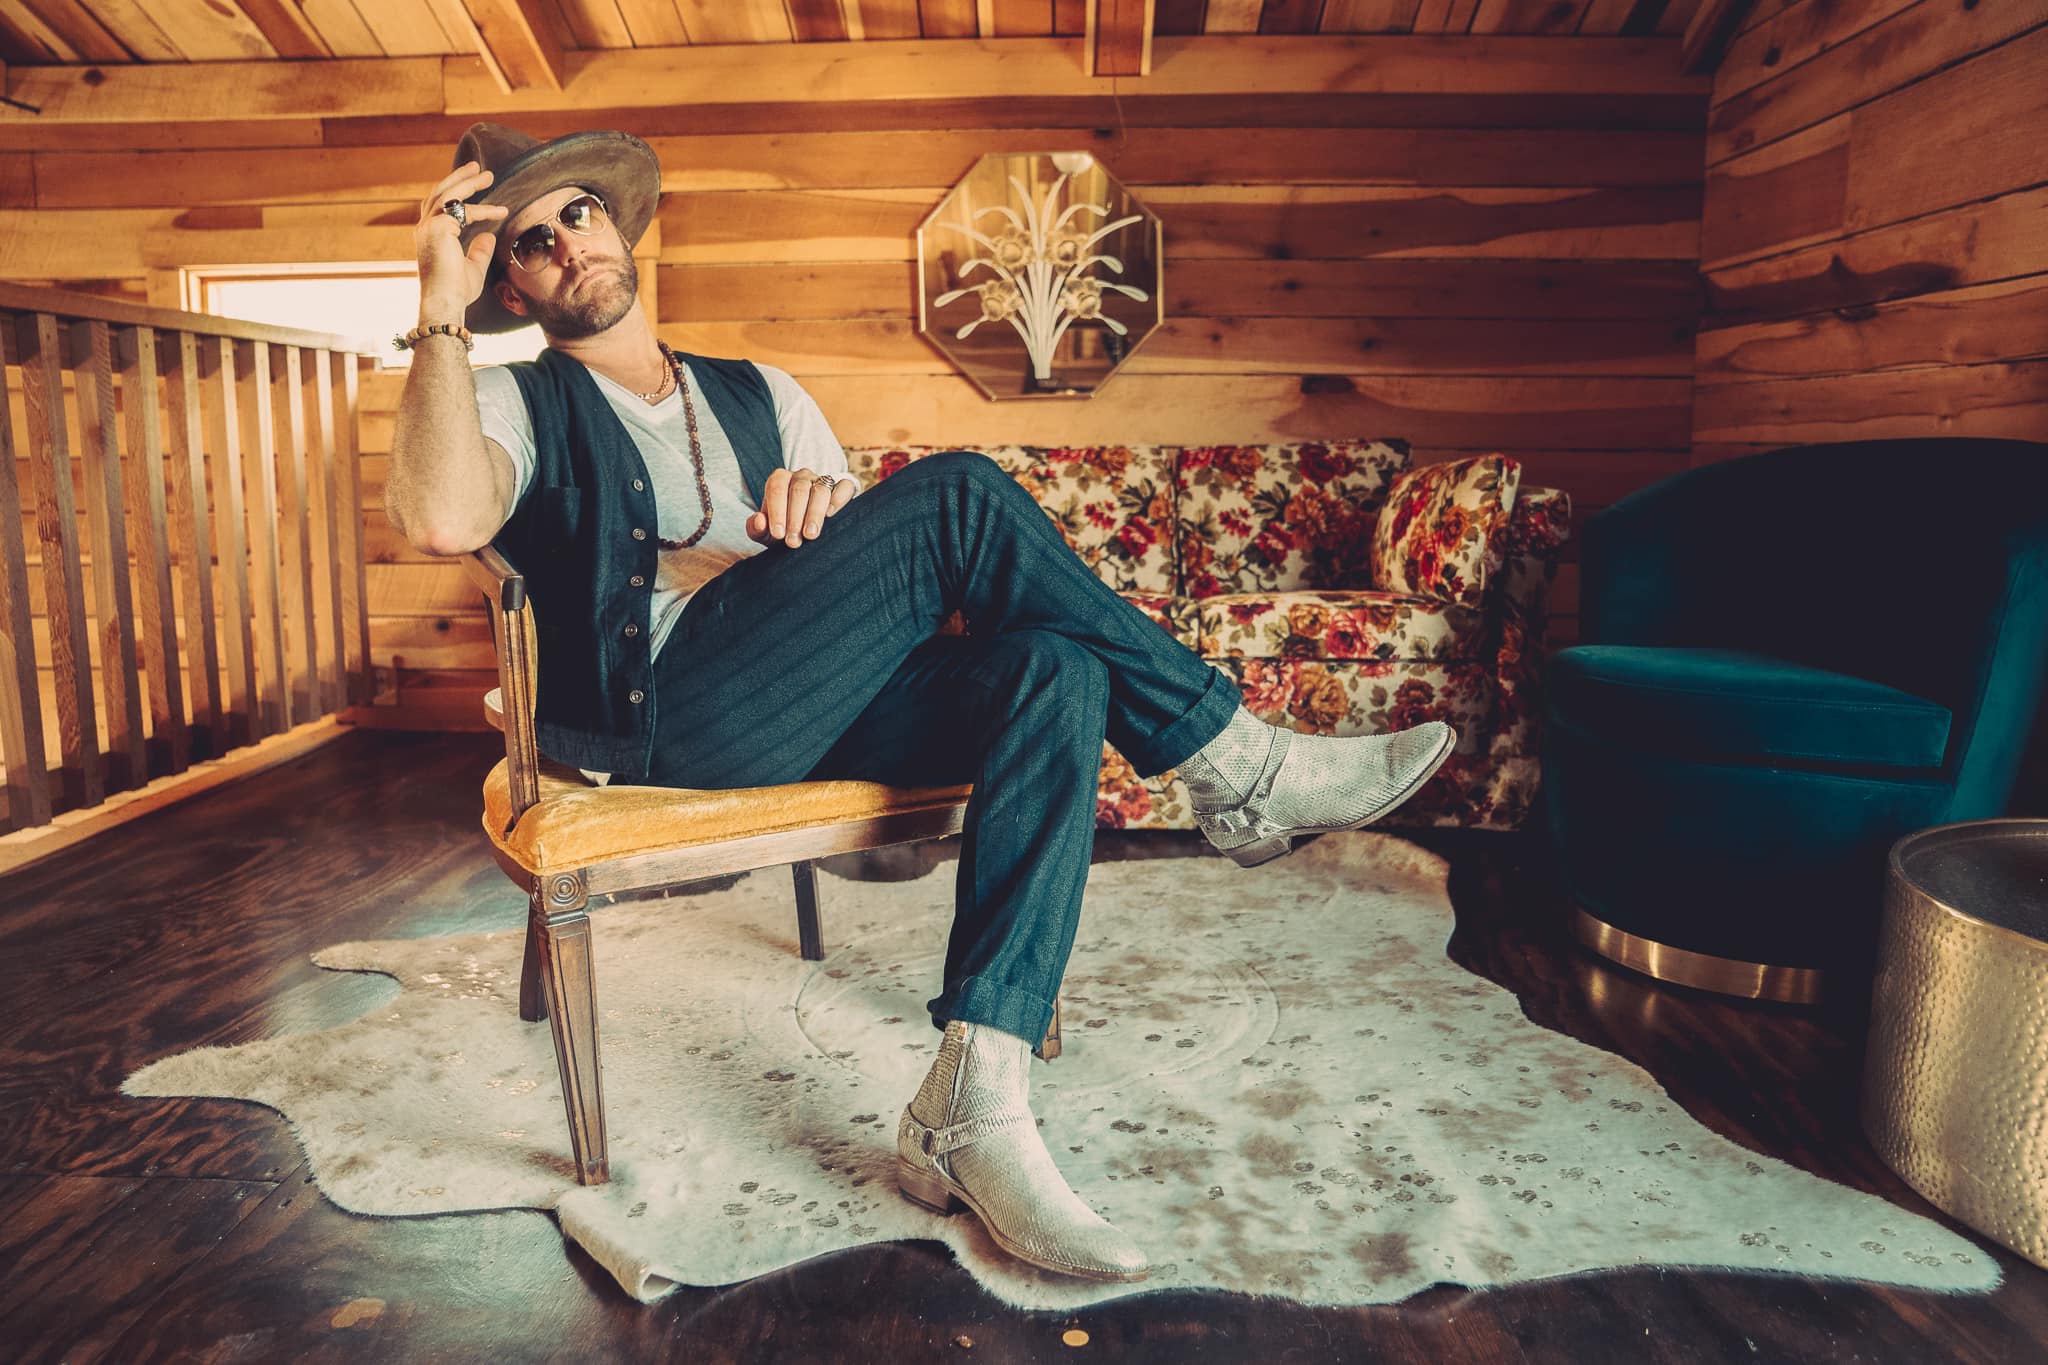 Drake White Returns to Country Music With New Project “The Optimystic” (Listen)